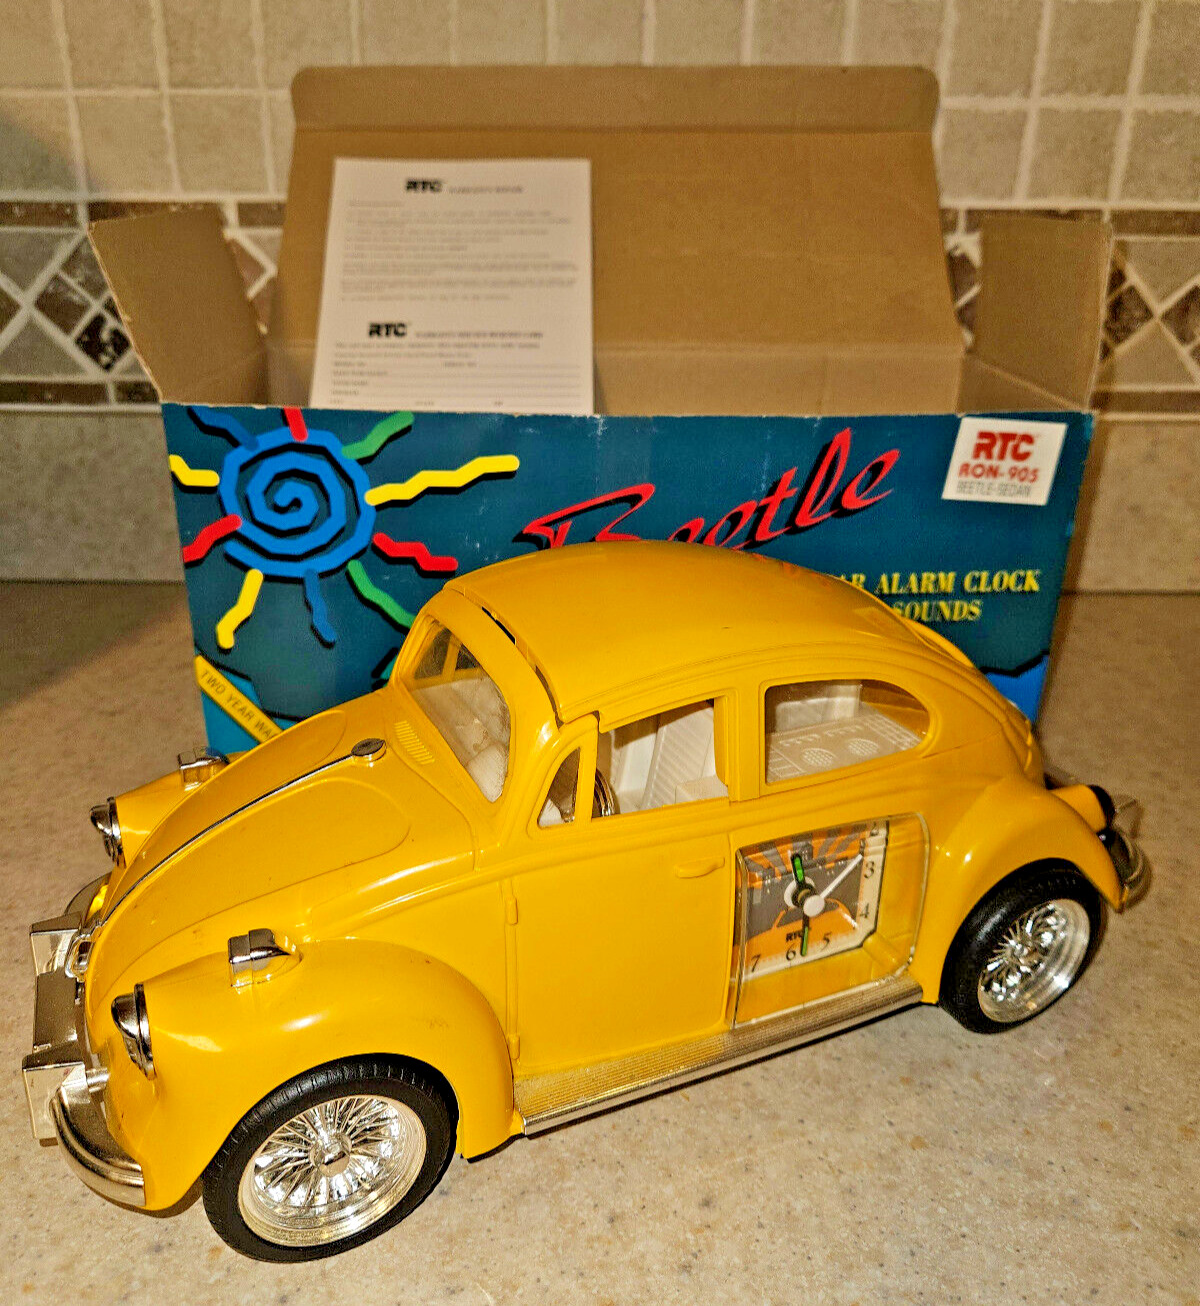 Volkswagen VW Beetle alarm clock-Rare yellow color with box and insert